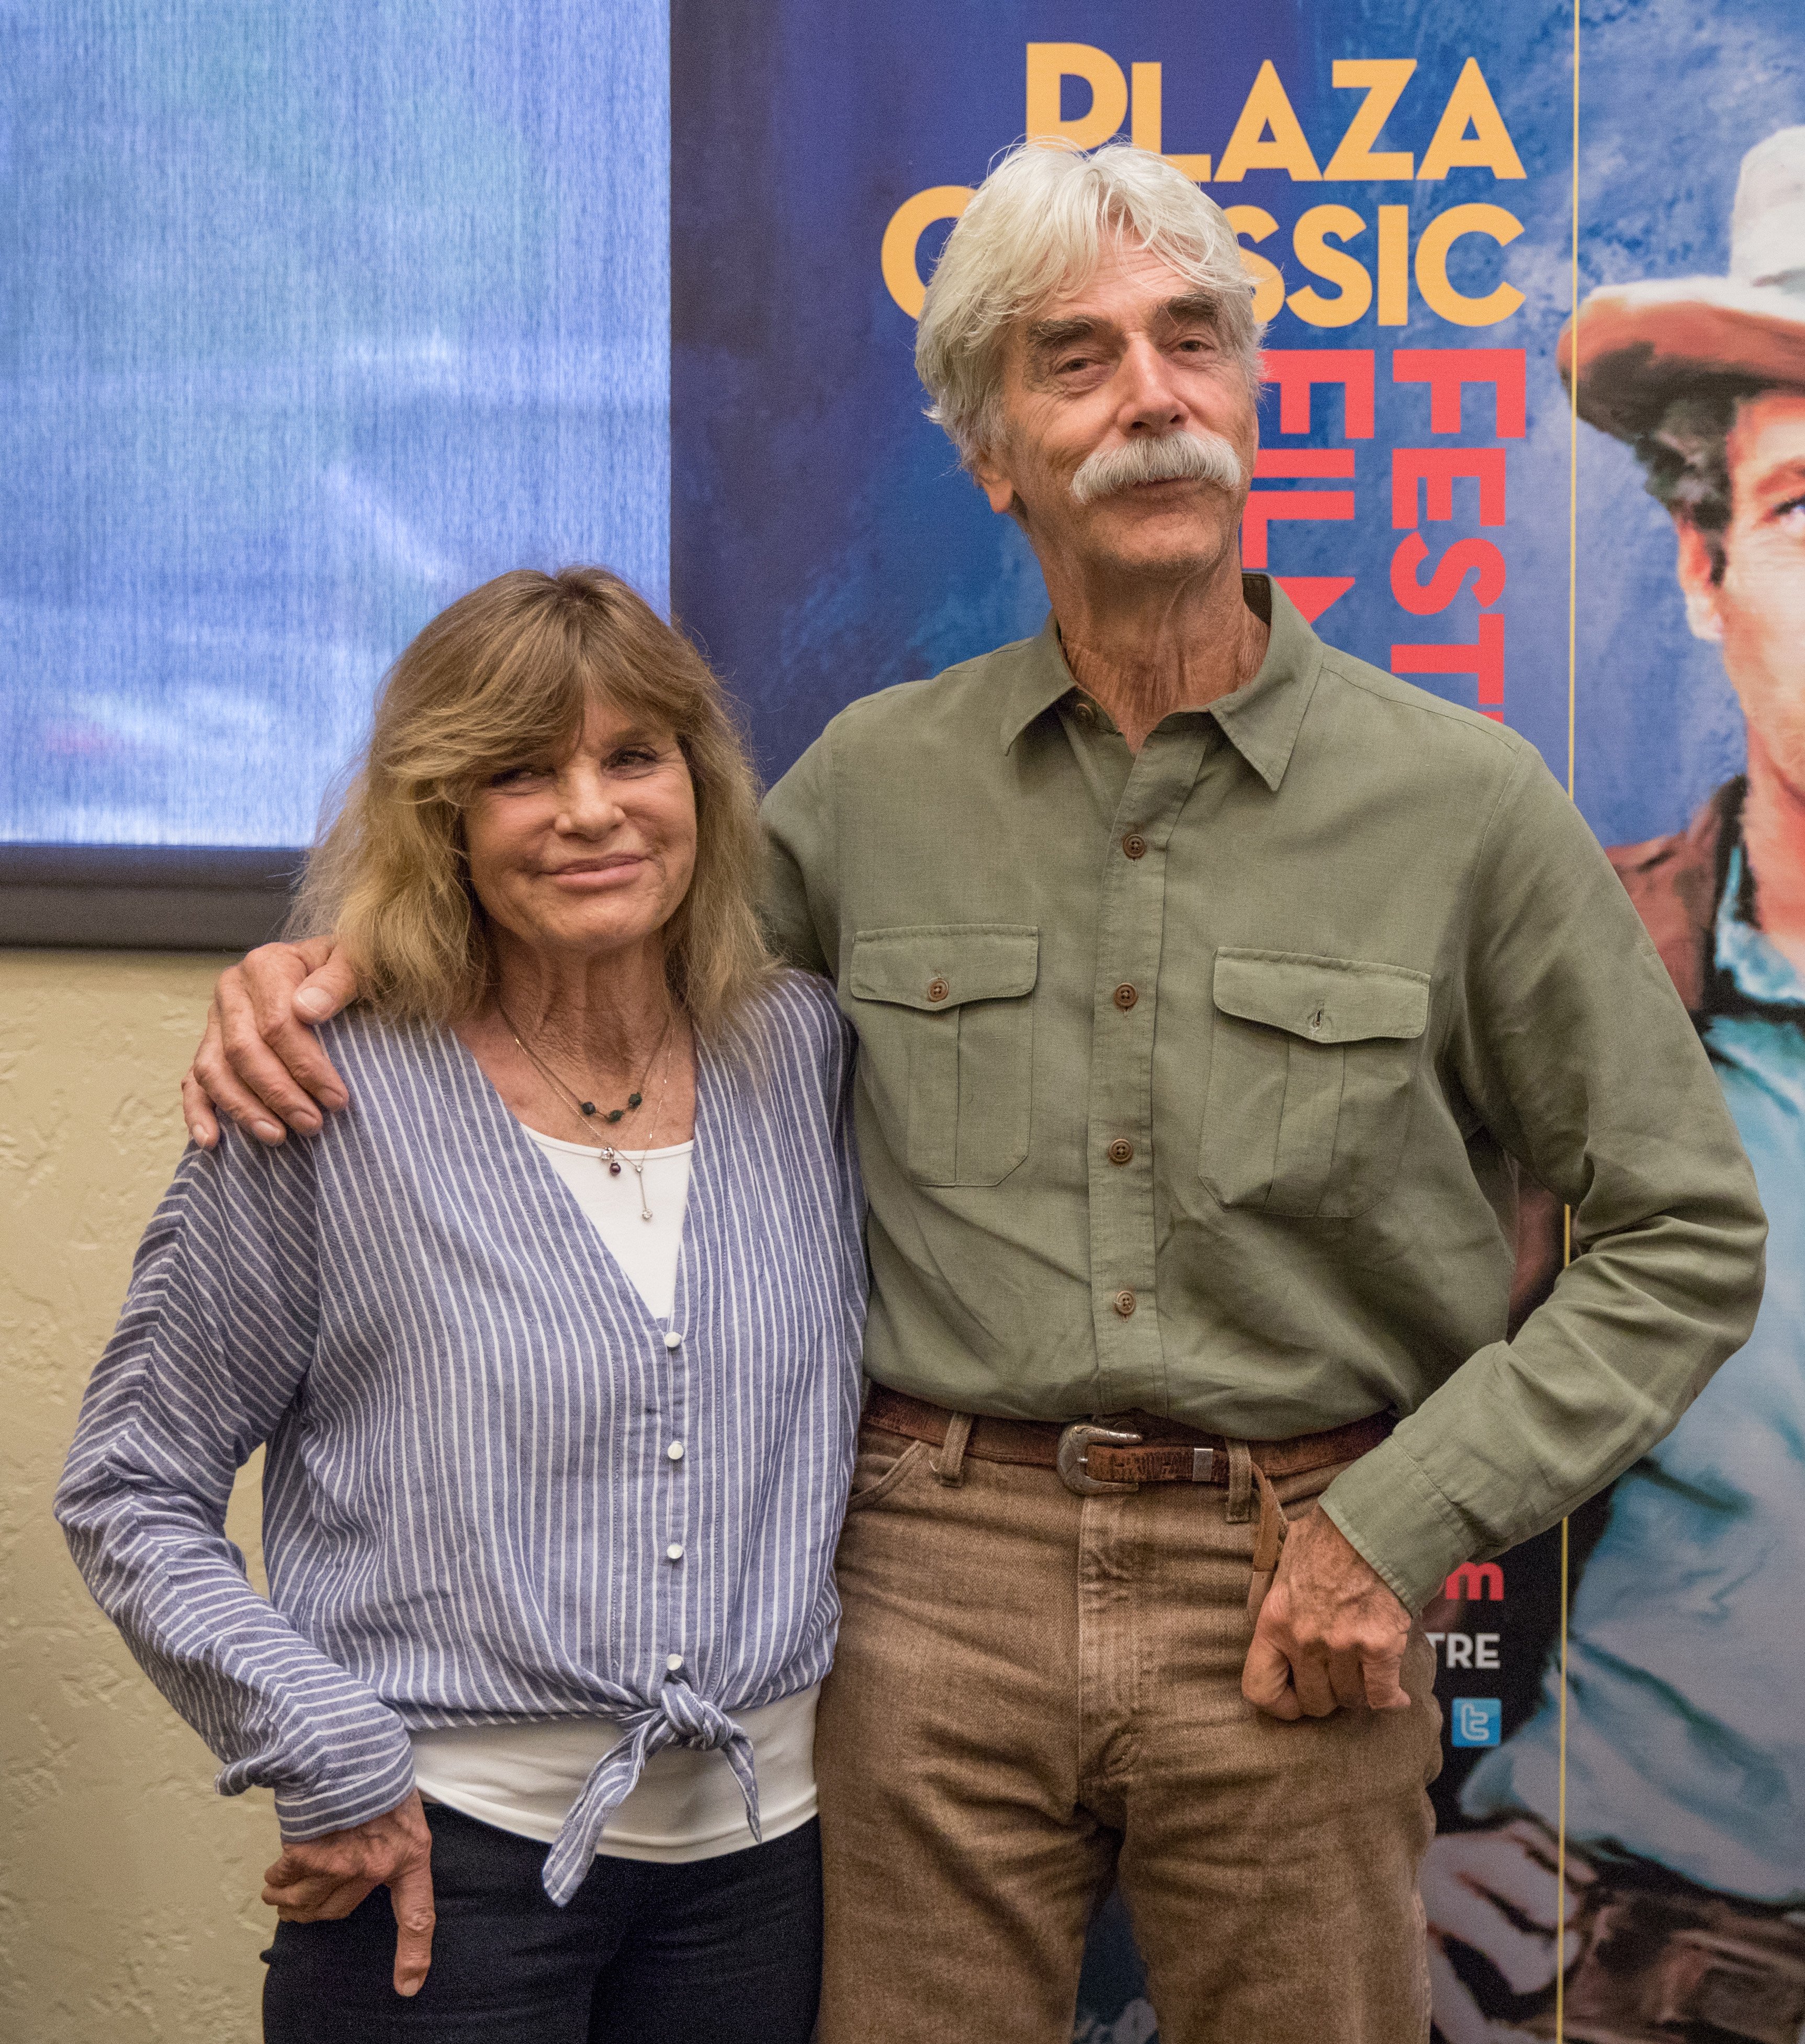 Katharine Ross and Sam Elliott at Plaza Classic Film Festival press conference on August 2, 2019, in El Paso, Texas | Source: Getty Images